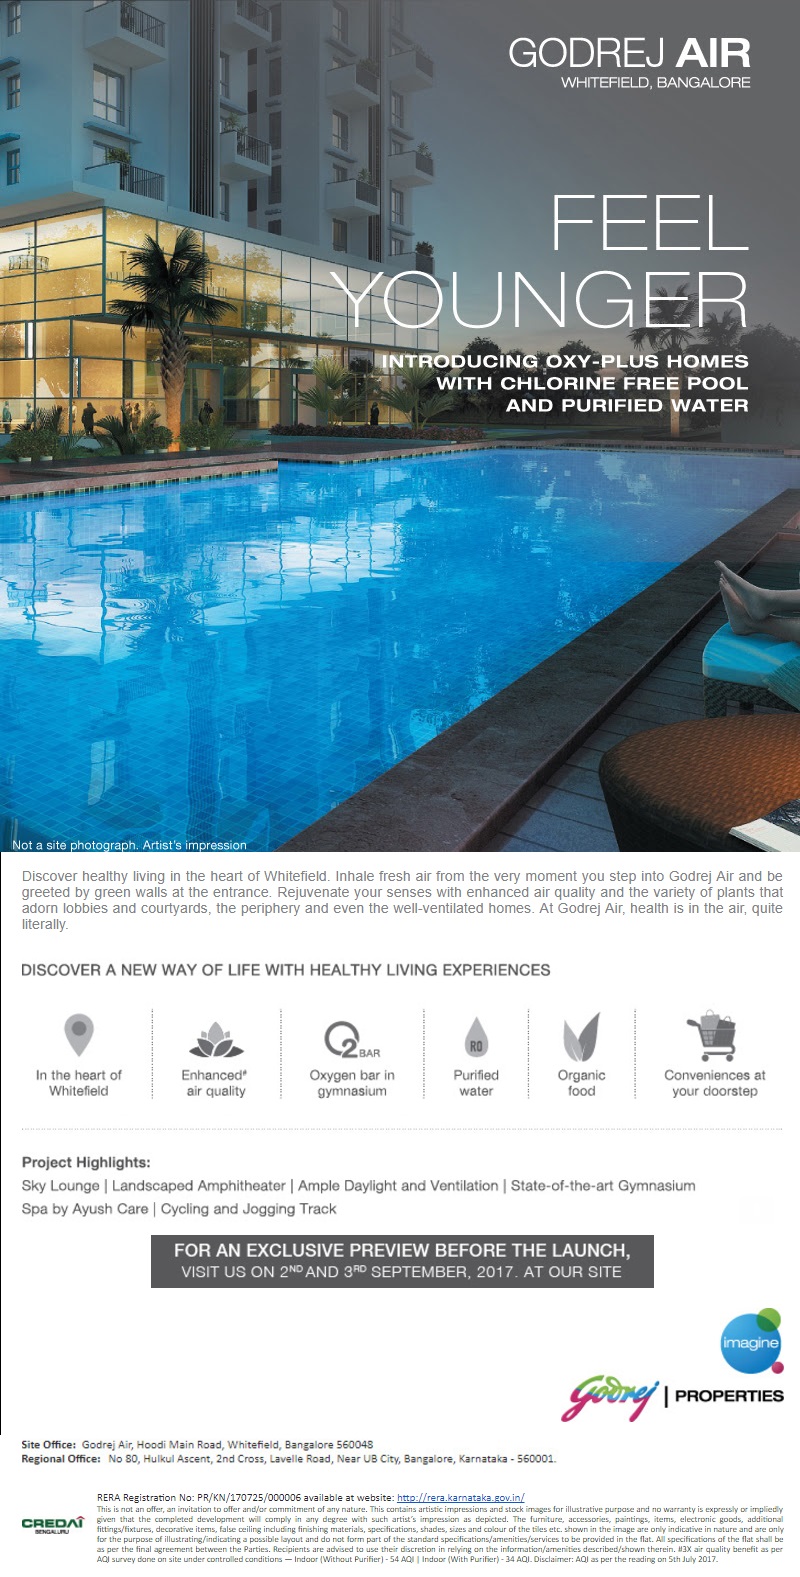 Godrej Air introducing Oxy-Plus homes with chlorine free pool and purified water